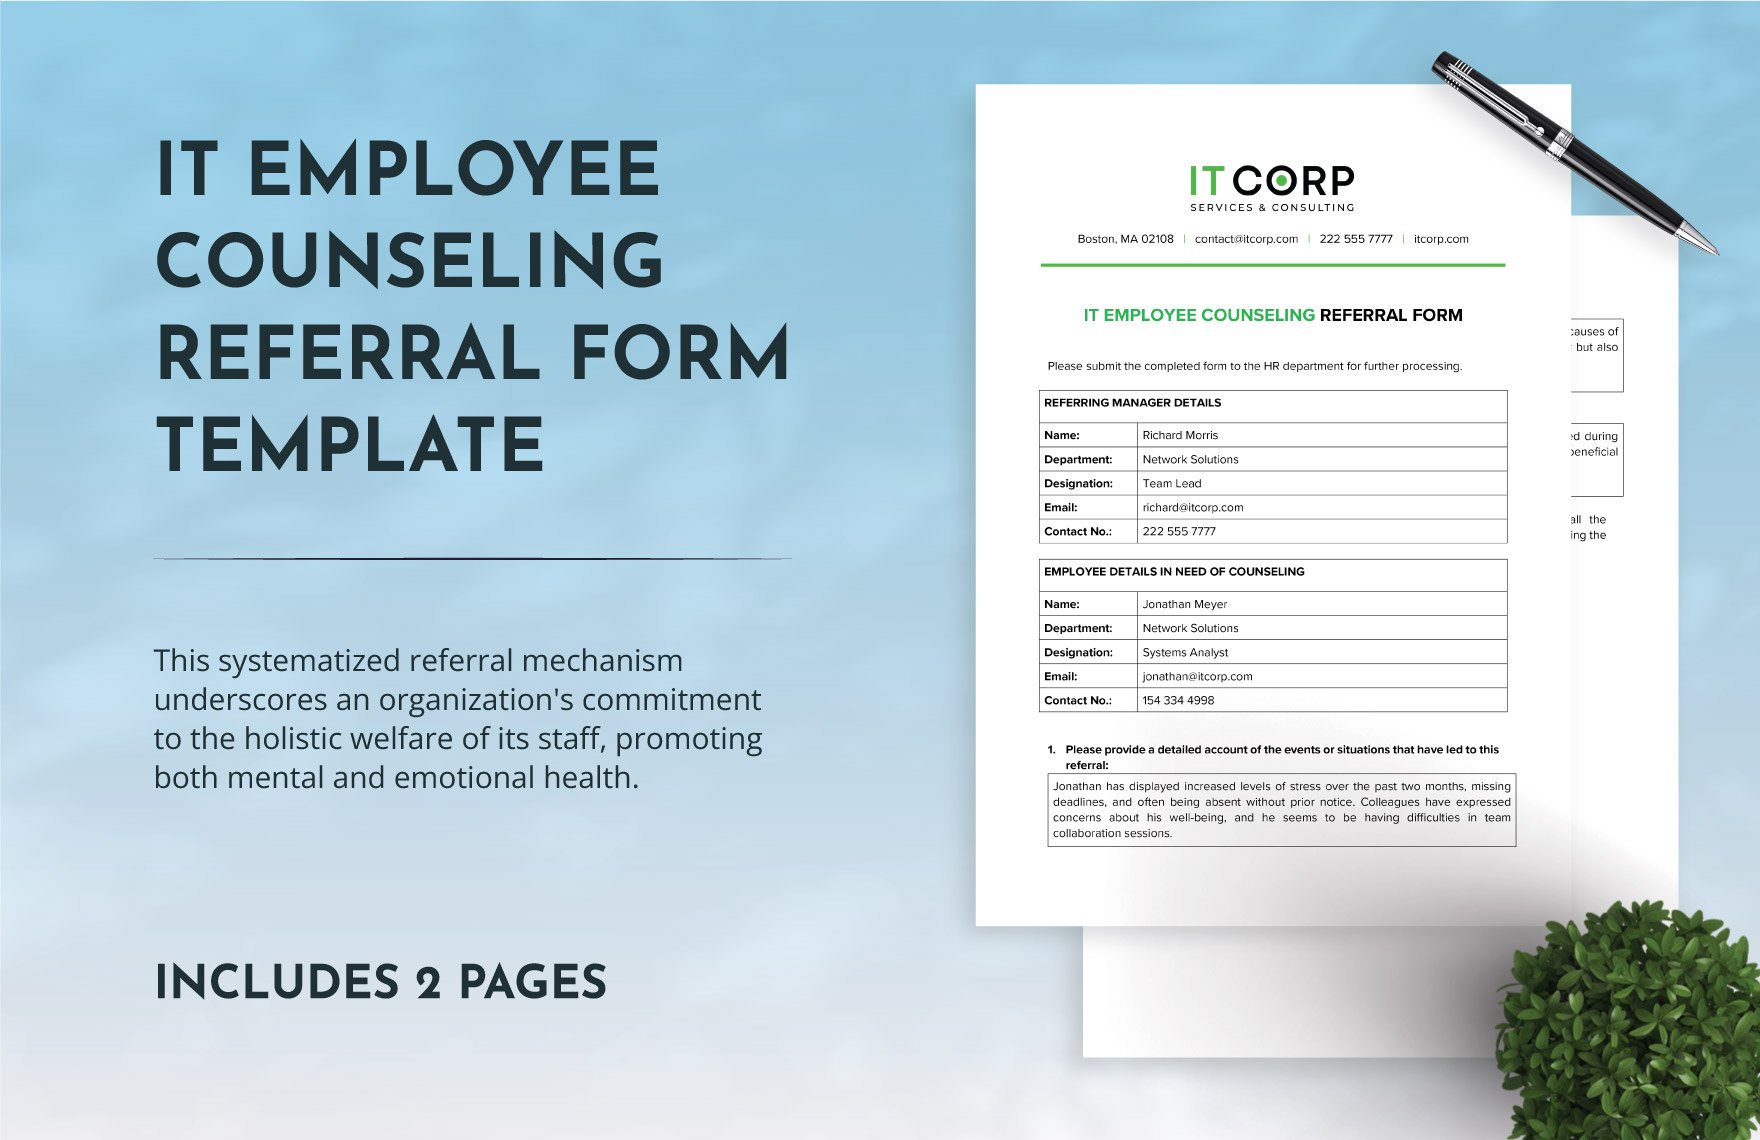 IT Employee Counseling Referral Form Template in Word, Google Docs, PDF